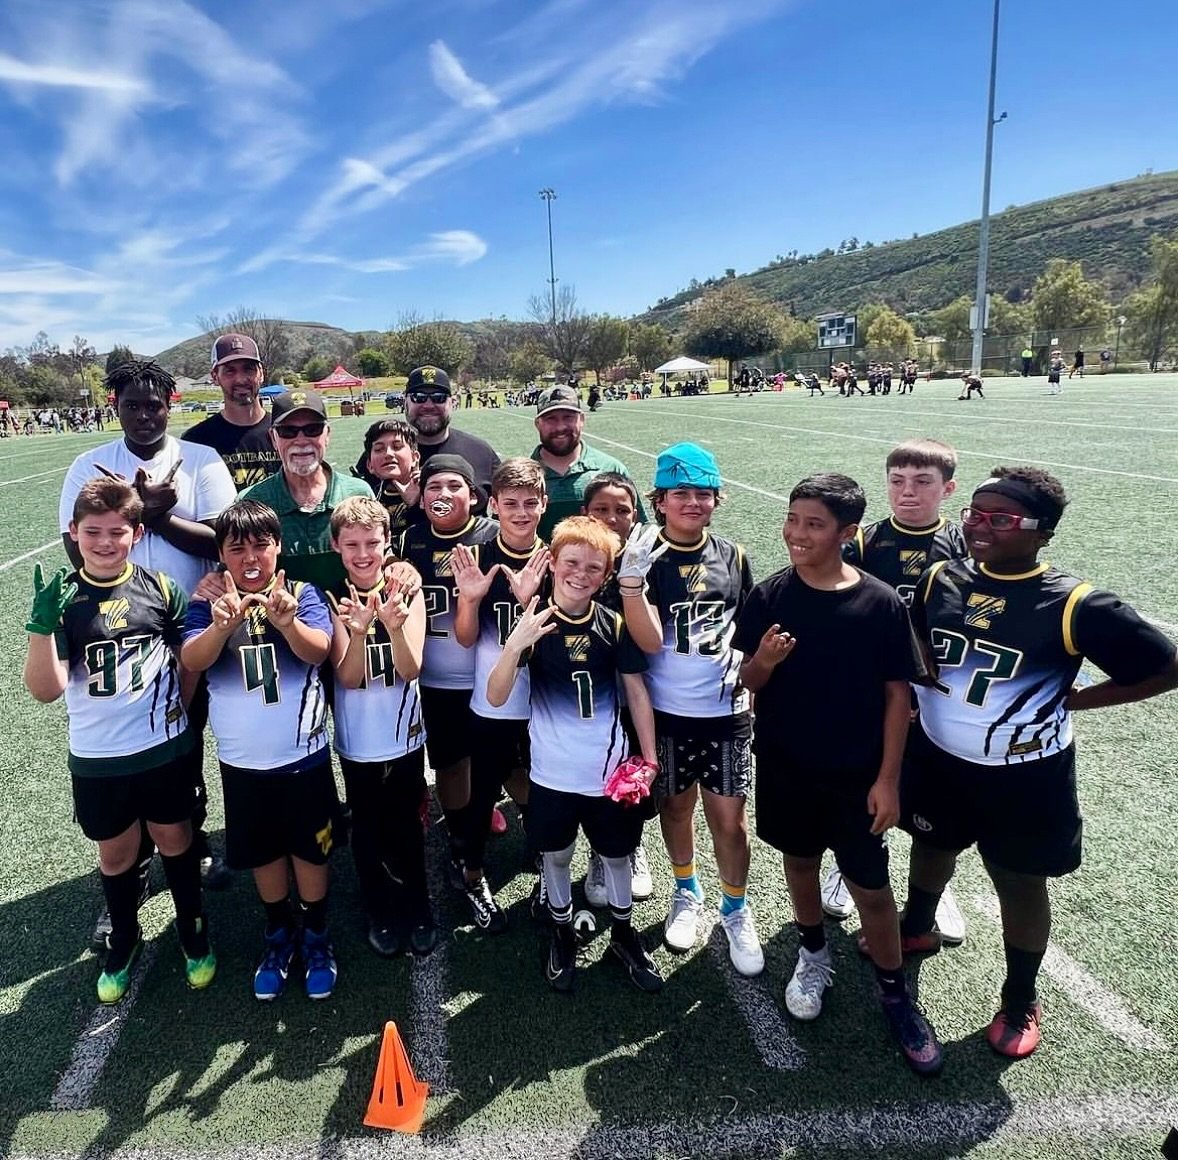 Calling all fans of TVPW athletes! ⭐️ We want to see your favorite player in action! Share their amazing moments on the field and tag us @temeculavalleypopwarner Let&rsquo;s celebrate the dedication, skill, and passion of these incredible athletes to